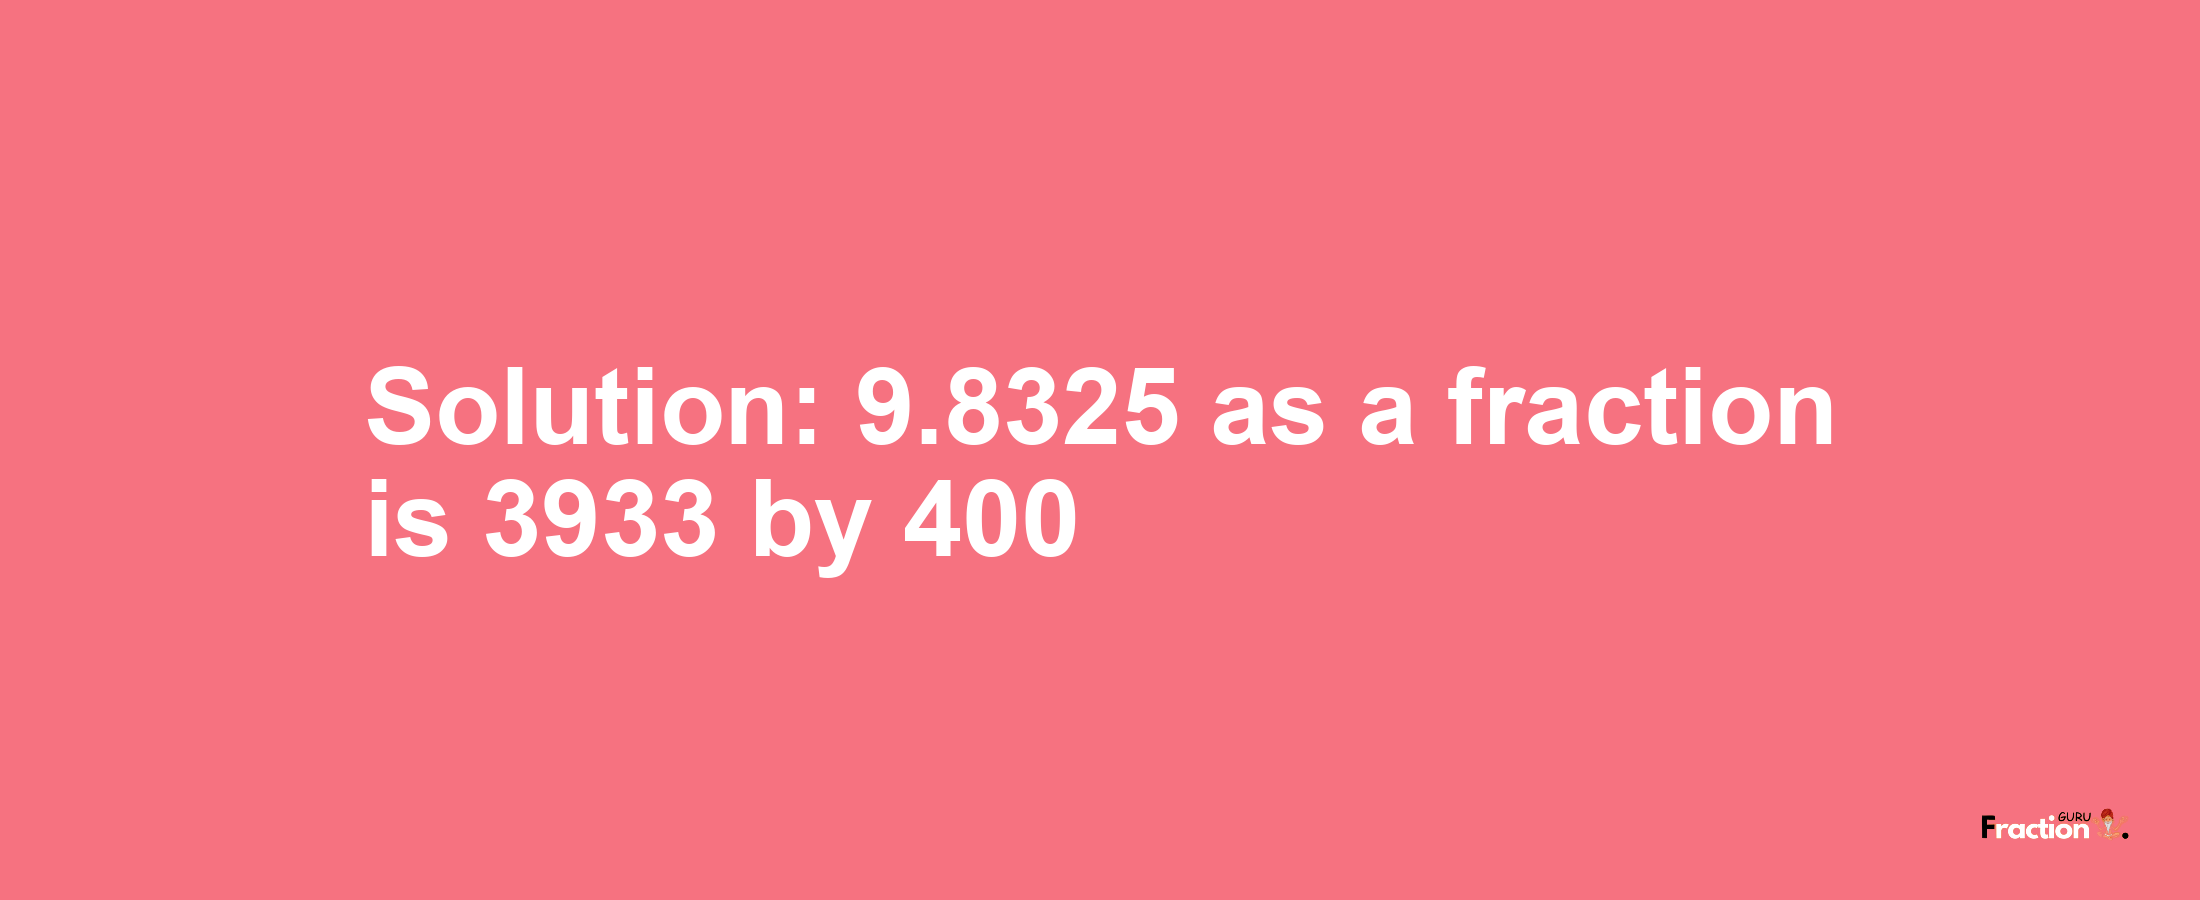 Solution:9.8325 as a fraction is 3933/400